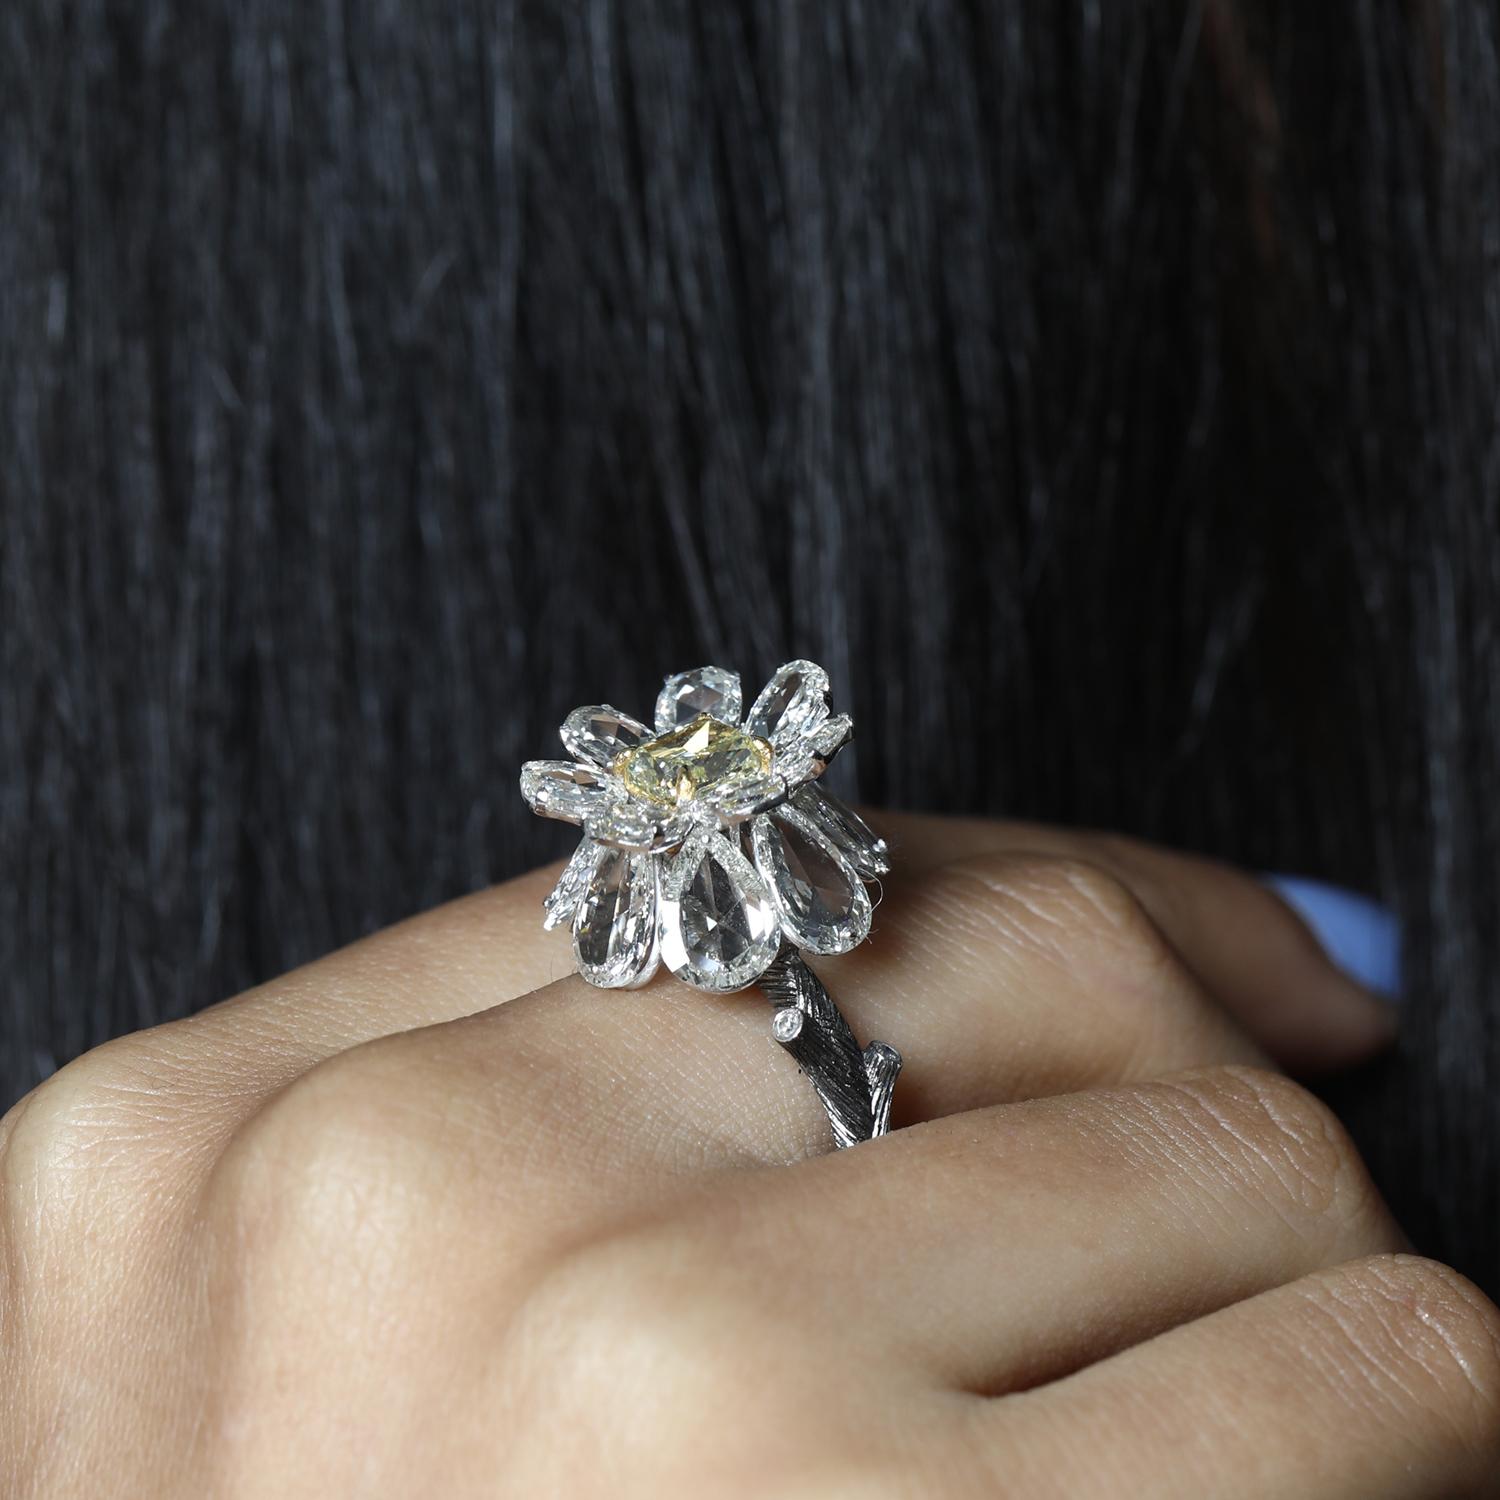 This 3 dimensional ring is inspired  from nature and is made with  V.A.K. Jewellery's signature engineering which uses minimal metal.
The rose cut diamonds are set to look  like floating petals . The design is bespoke , limited to just 1 piece in